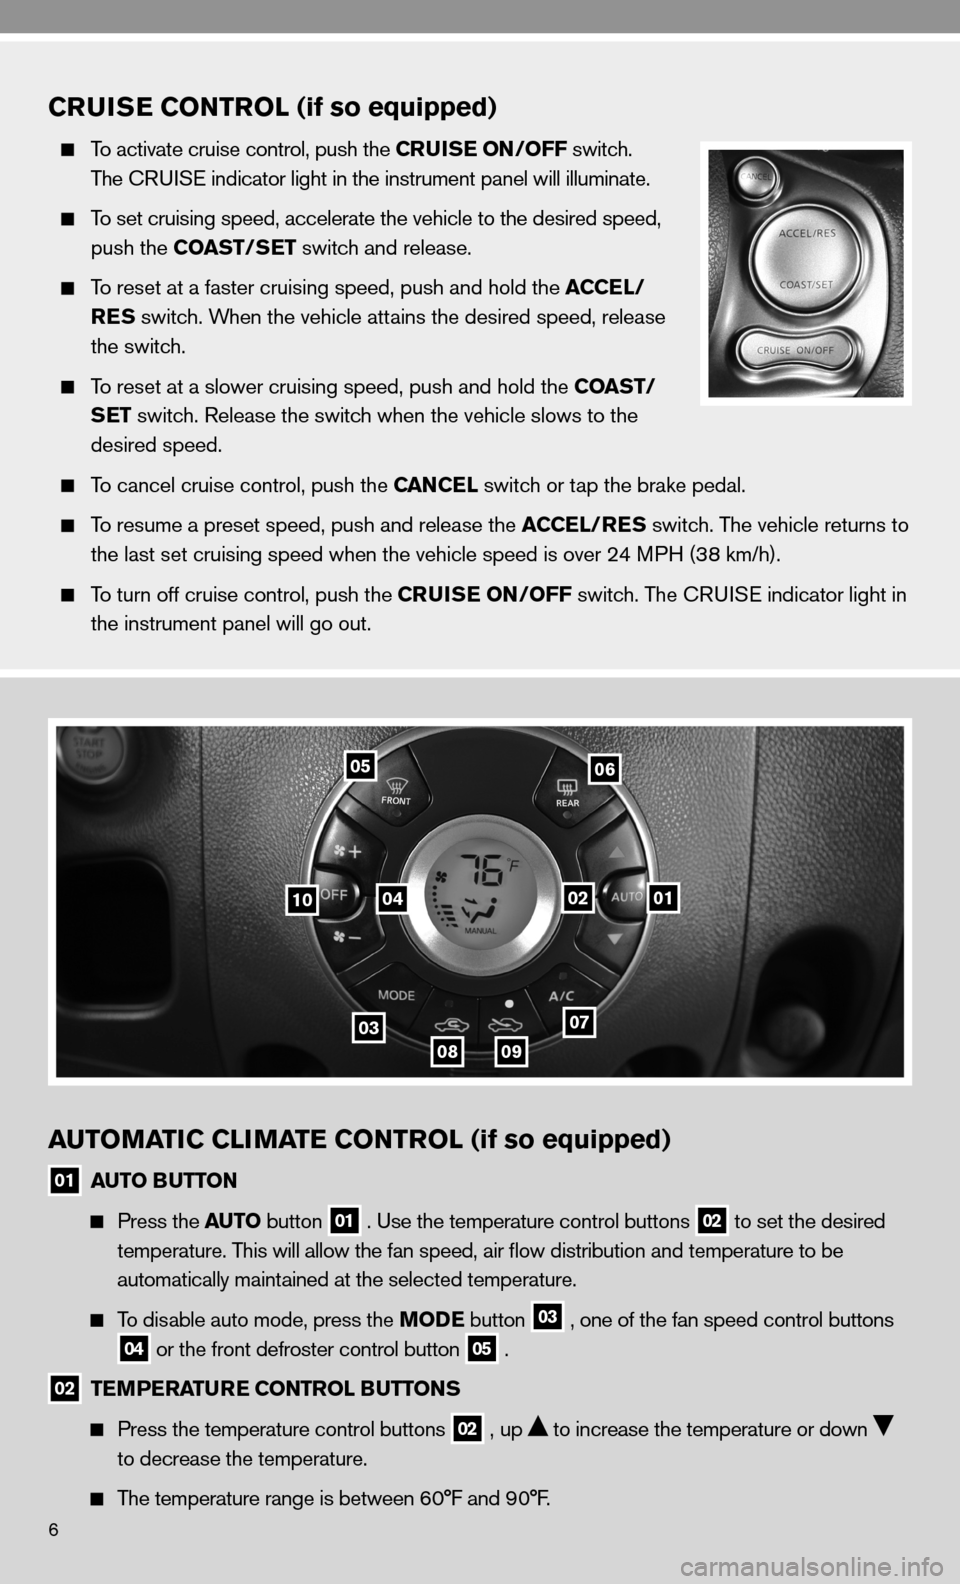 NISSAN CUBE 2010 3.G Quick Reference Guide 6
CRUISE CONTROL (if so equipped)
  To activate cruise control, push the CRUISE ON/OFF switch. 
    The c Rui Se indicator light in the instrument panel will illuminate.
 
  To set cruising speed, acc